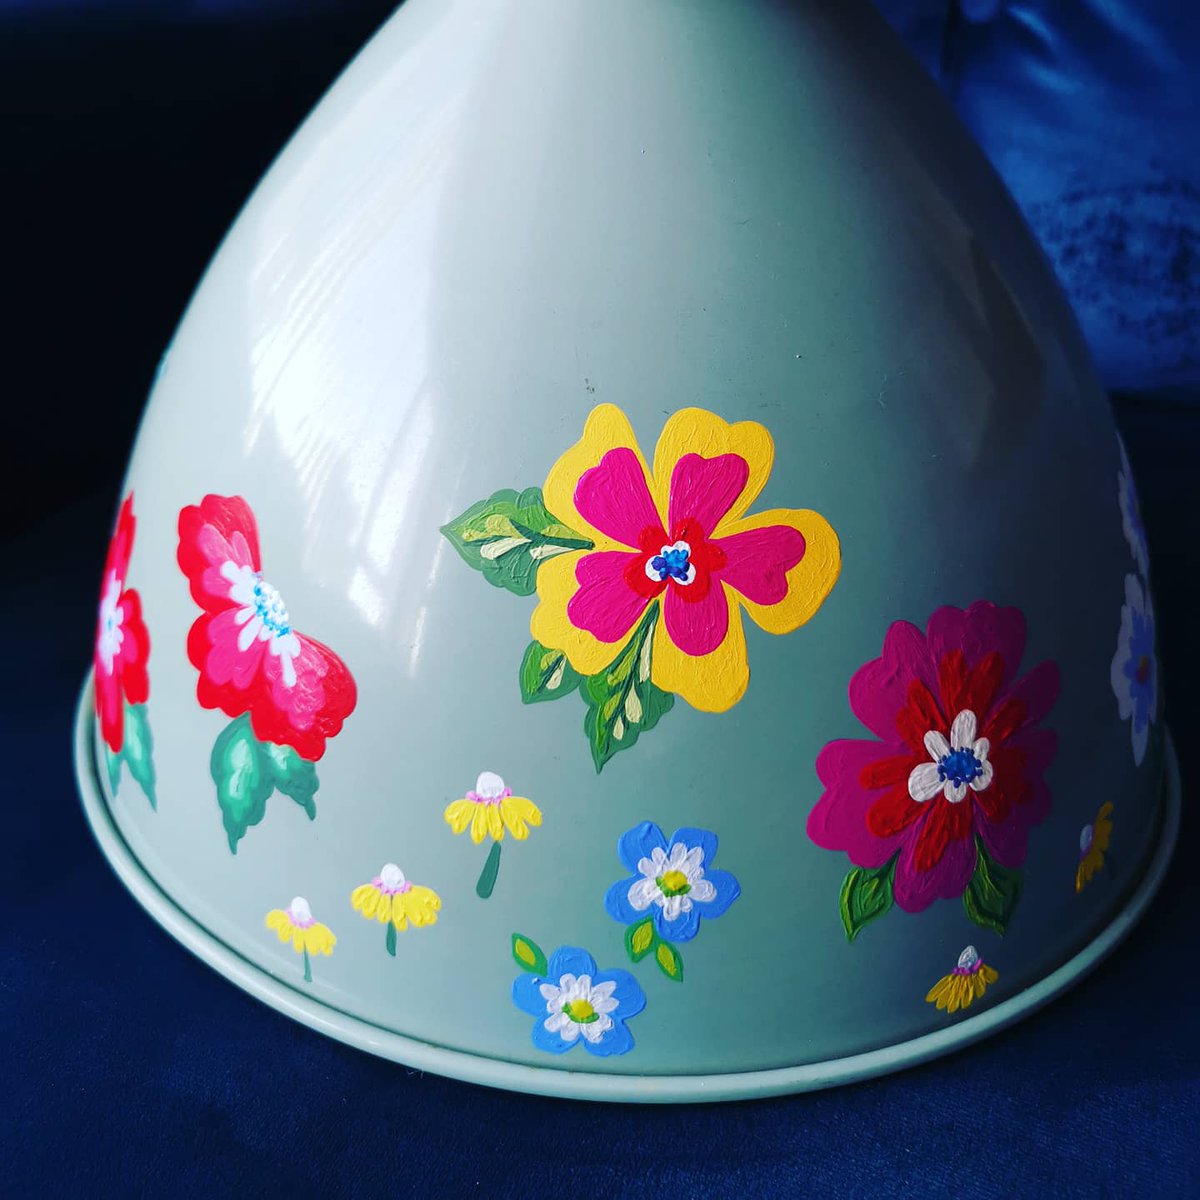 Upcycling an old lampshade #vintage #flowerart #flowerpainting #upcycle #handpainted #upcycling #interiorart #flowers #colourpop #colourfulpainting